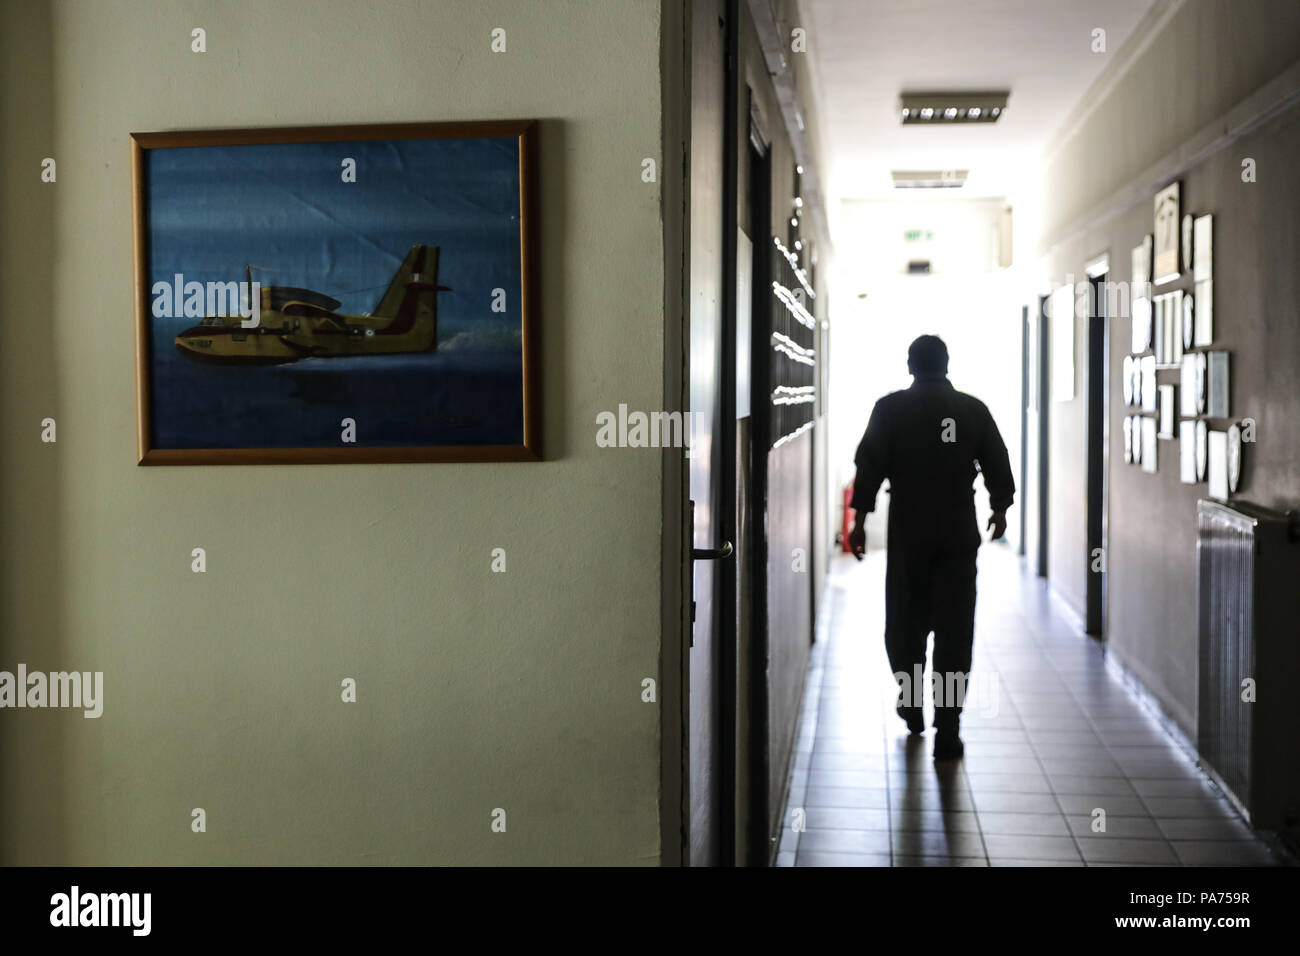 Athens, Greece. 20th July, 2018. Operations officer Fotis Gavrilis walks in the building of 355 Tactical Transport Squadron at Elefsina Air Base, Athens, Greece, on July 20, 2018. The 355 Tactical Transport Squadron was established in 1947 to fight wildfires. Credit: Lefteris Partsalis/Xinhua/Alamy Live News Stock Photo